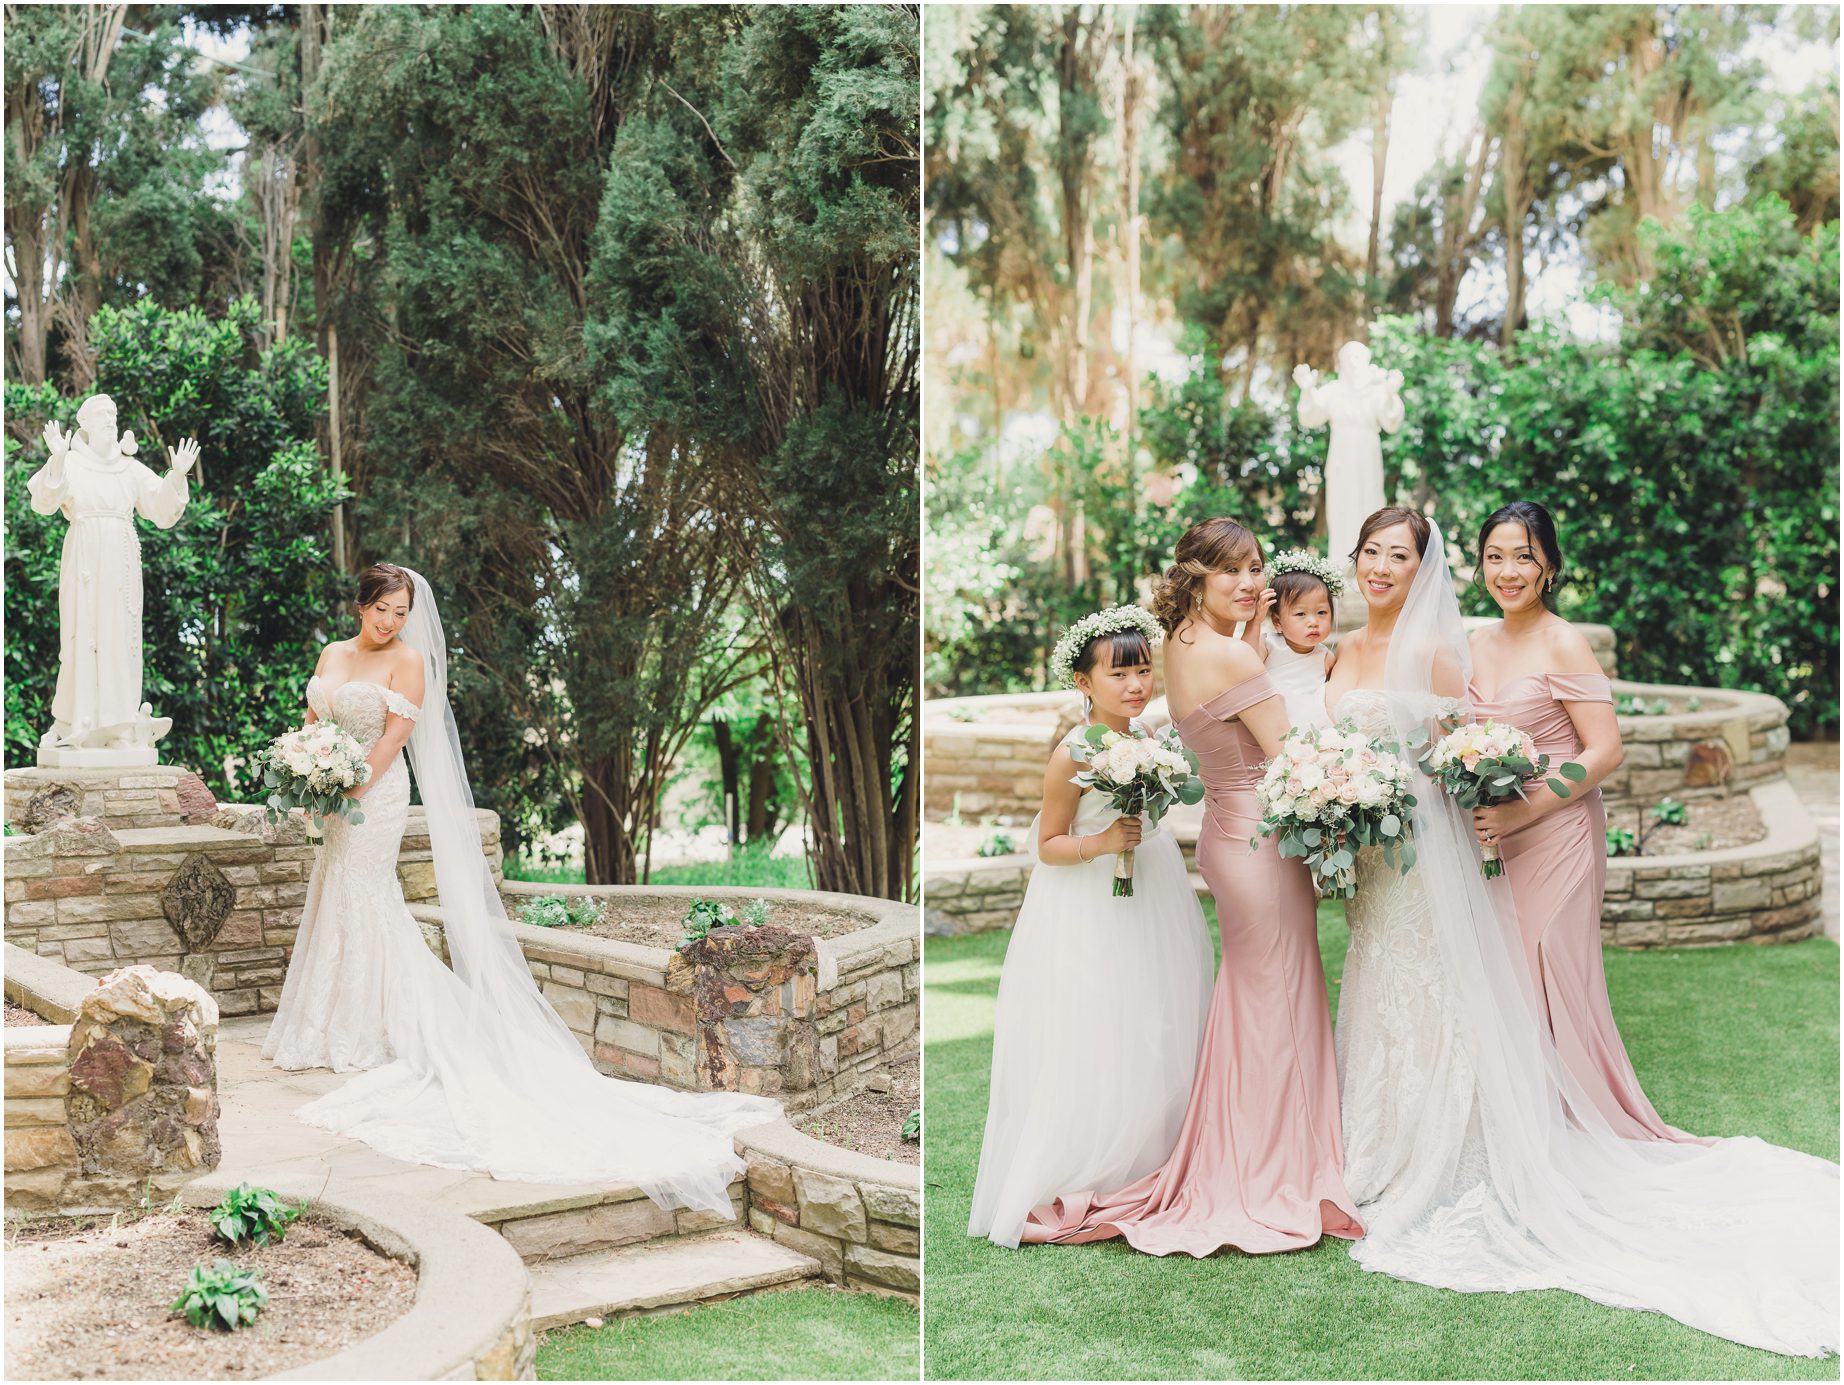 The bridesmaids pose and the bride stands elegantly in front of a statue of St Francis